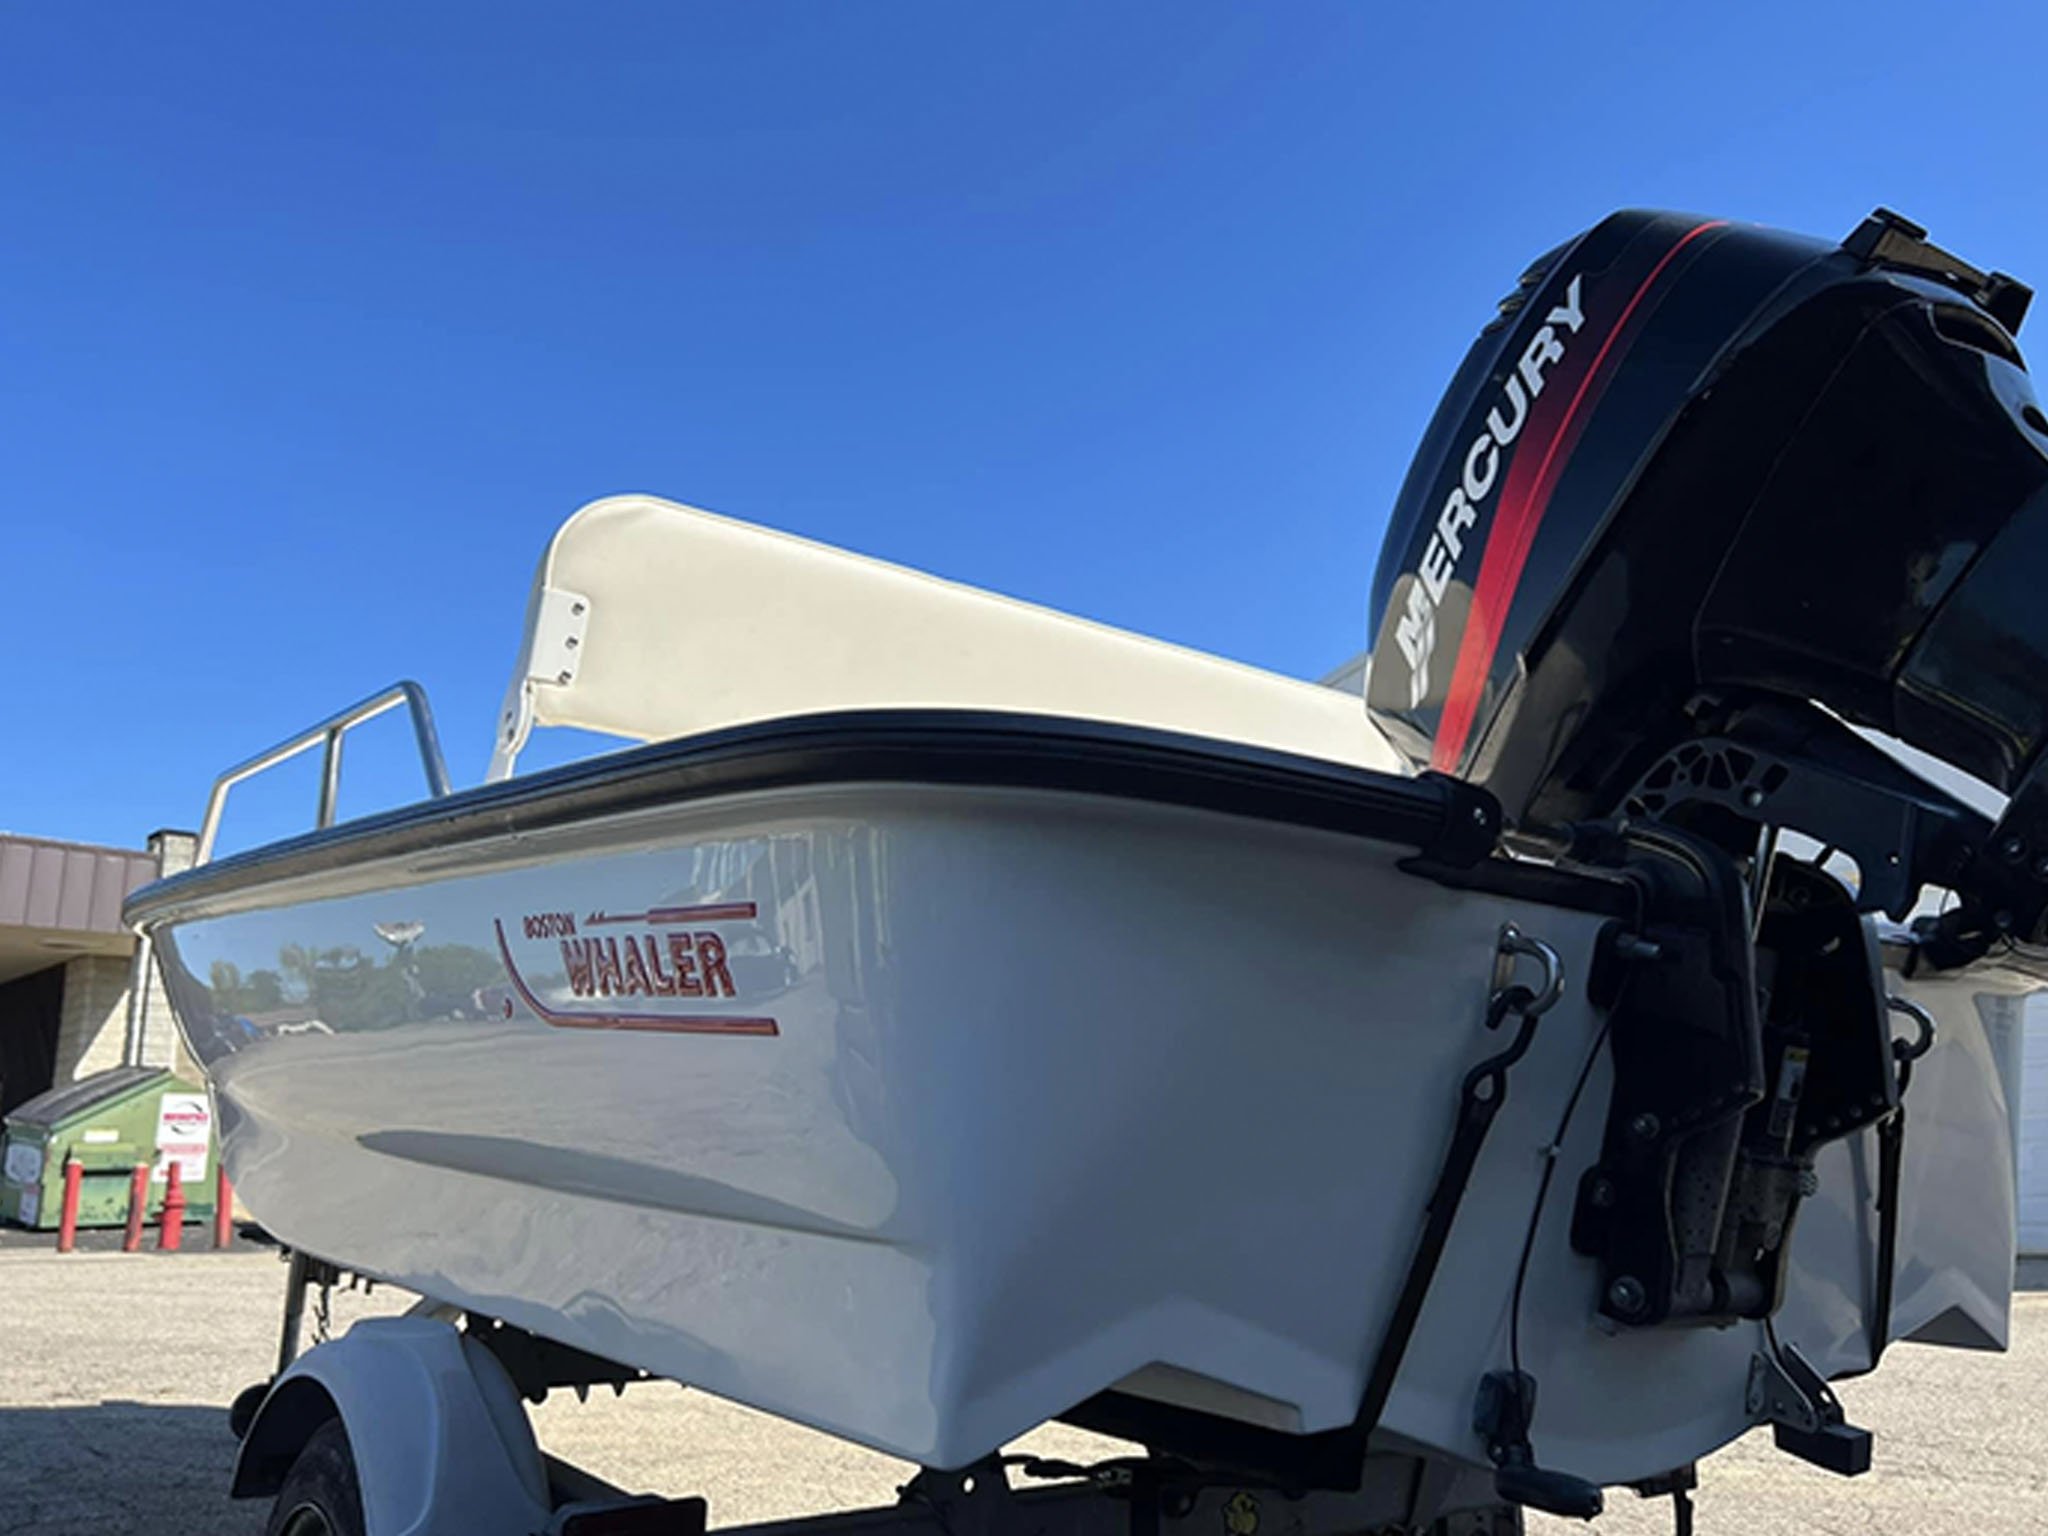 Boston Whaler - after exterior cleaning job applied